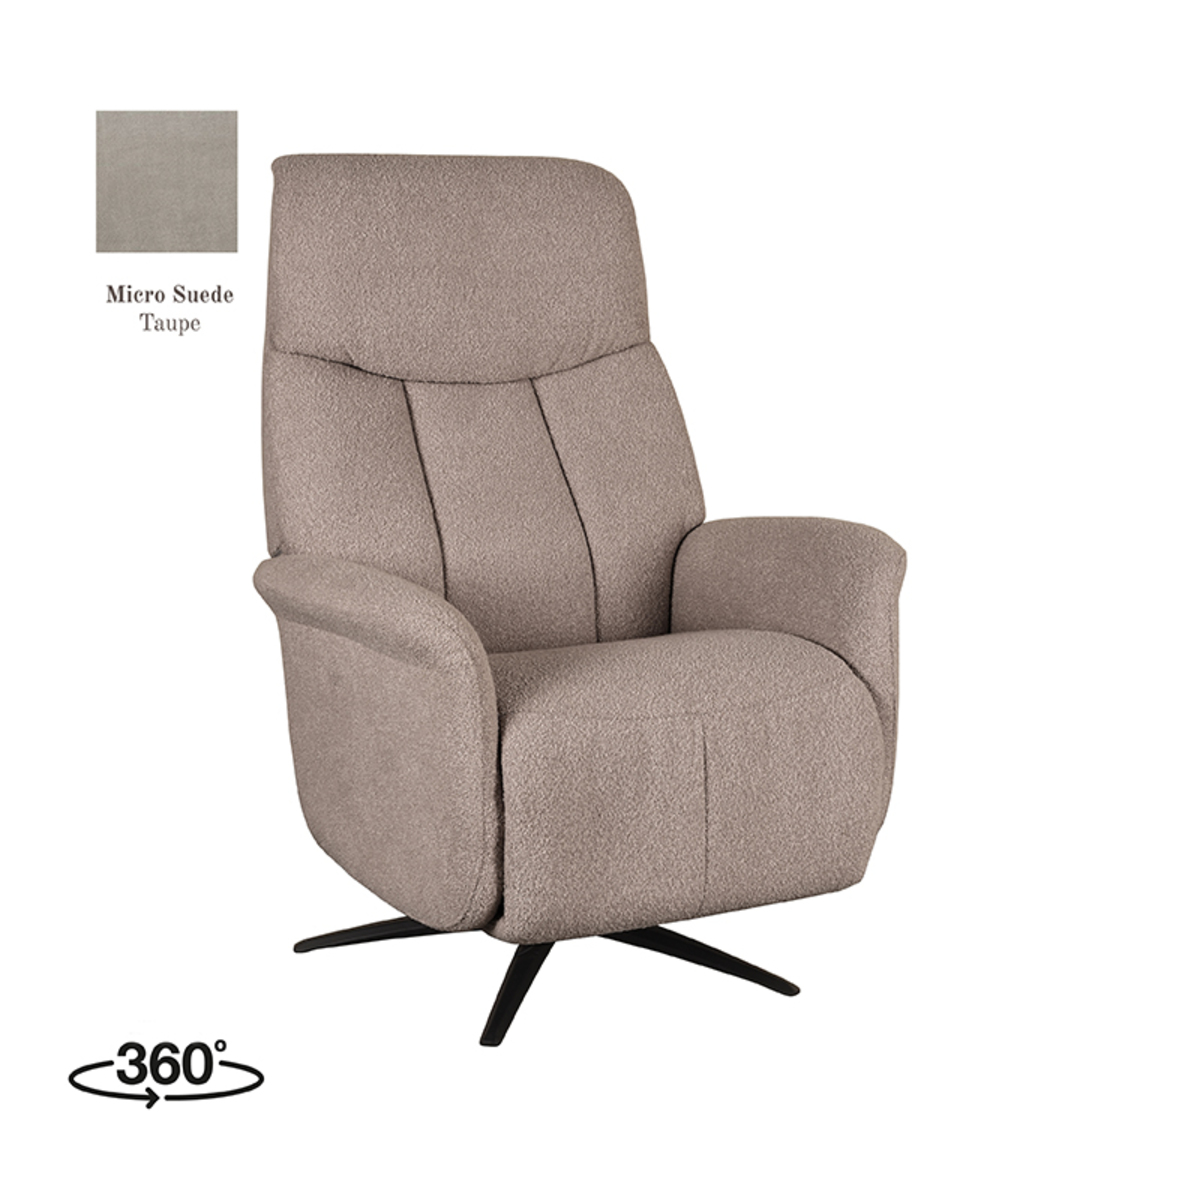 LABEL51 Fauteuil Oslo - Taupe - Micro Suede - Elektrische Taupe Fauteuil